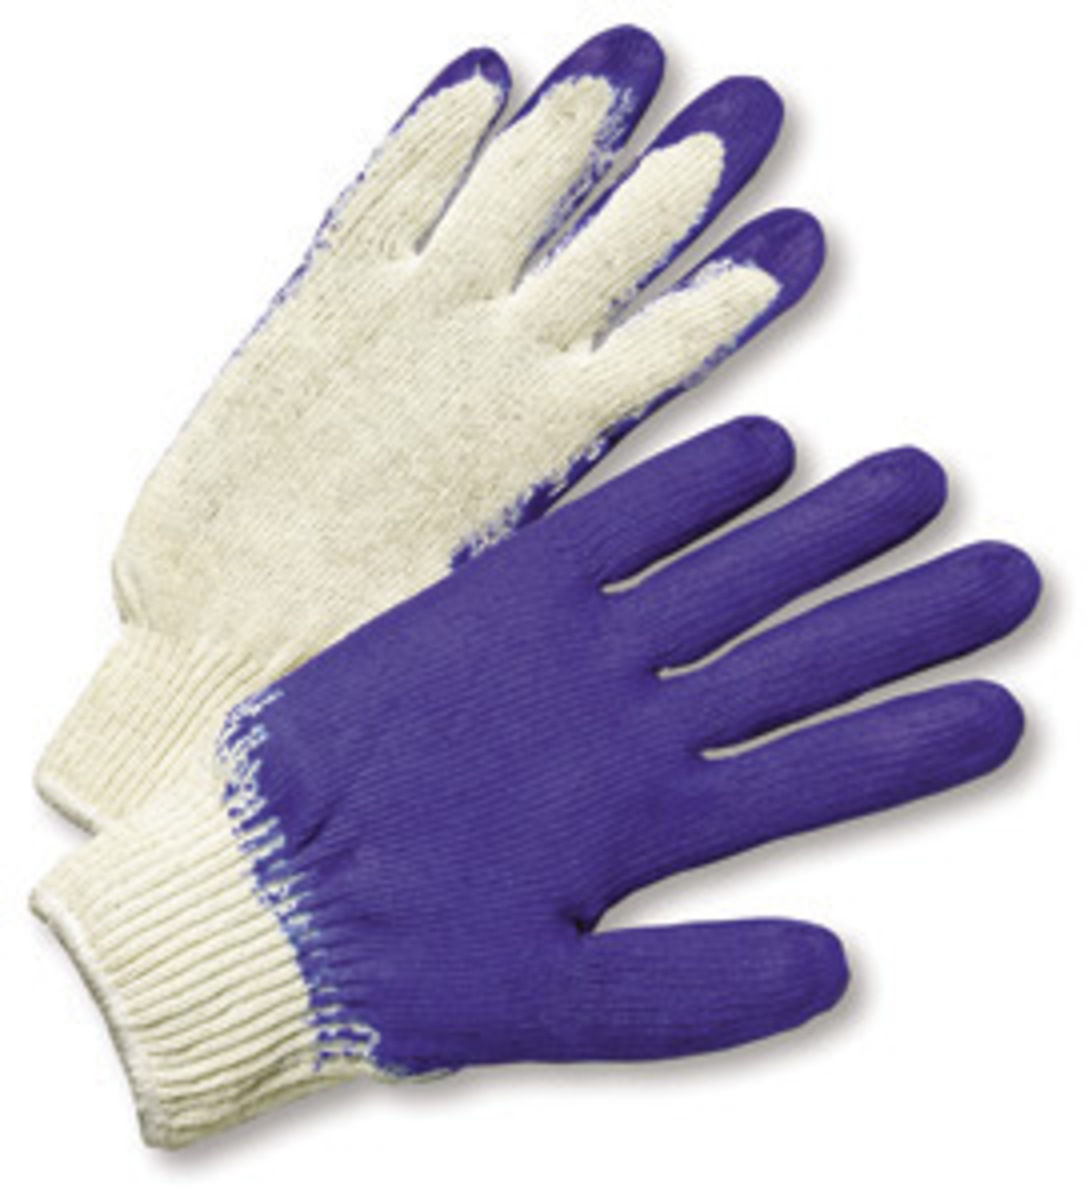 Cotton Latex Palm Coated Work Safety Gloves Rubber Palm Coated WT 